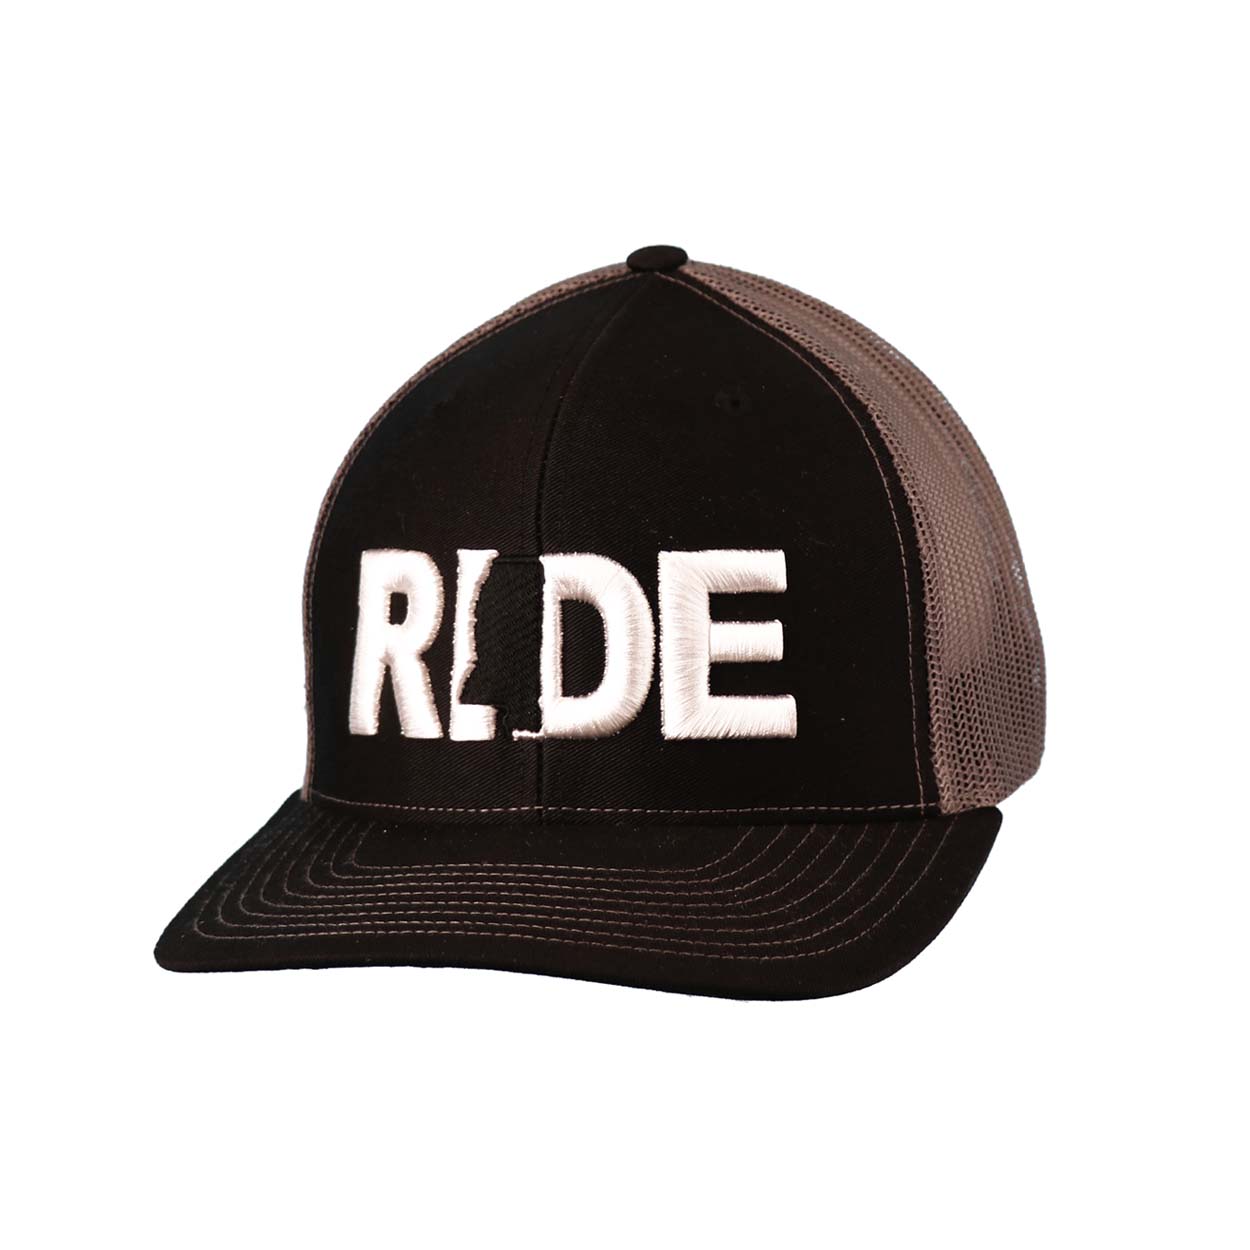 Ride Mississippi Classic Embroidered Snapback Trucker Hat Black/Gray